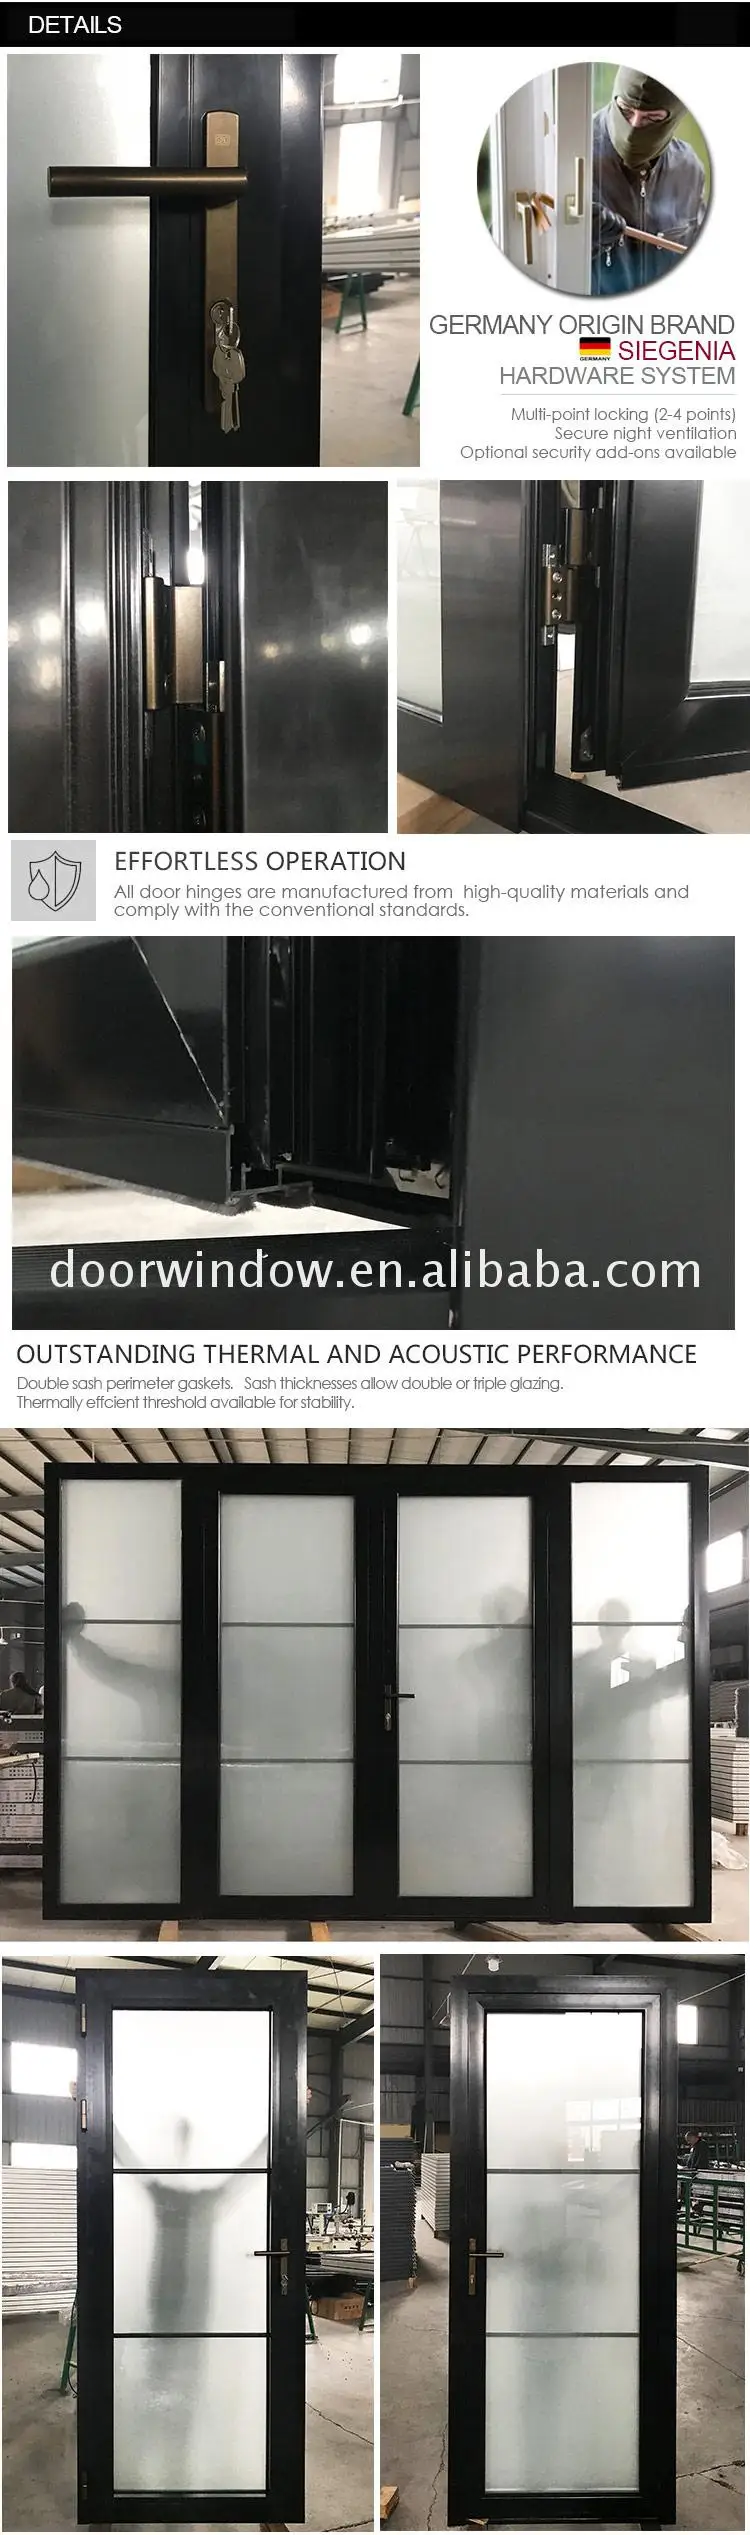 China factory used exterior french doors for sale steel window grill design restaurant entrance